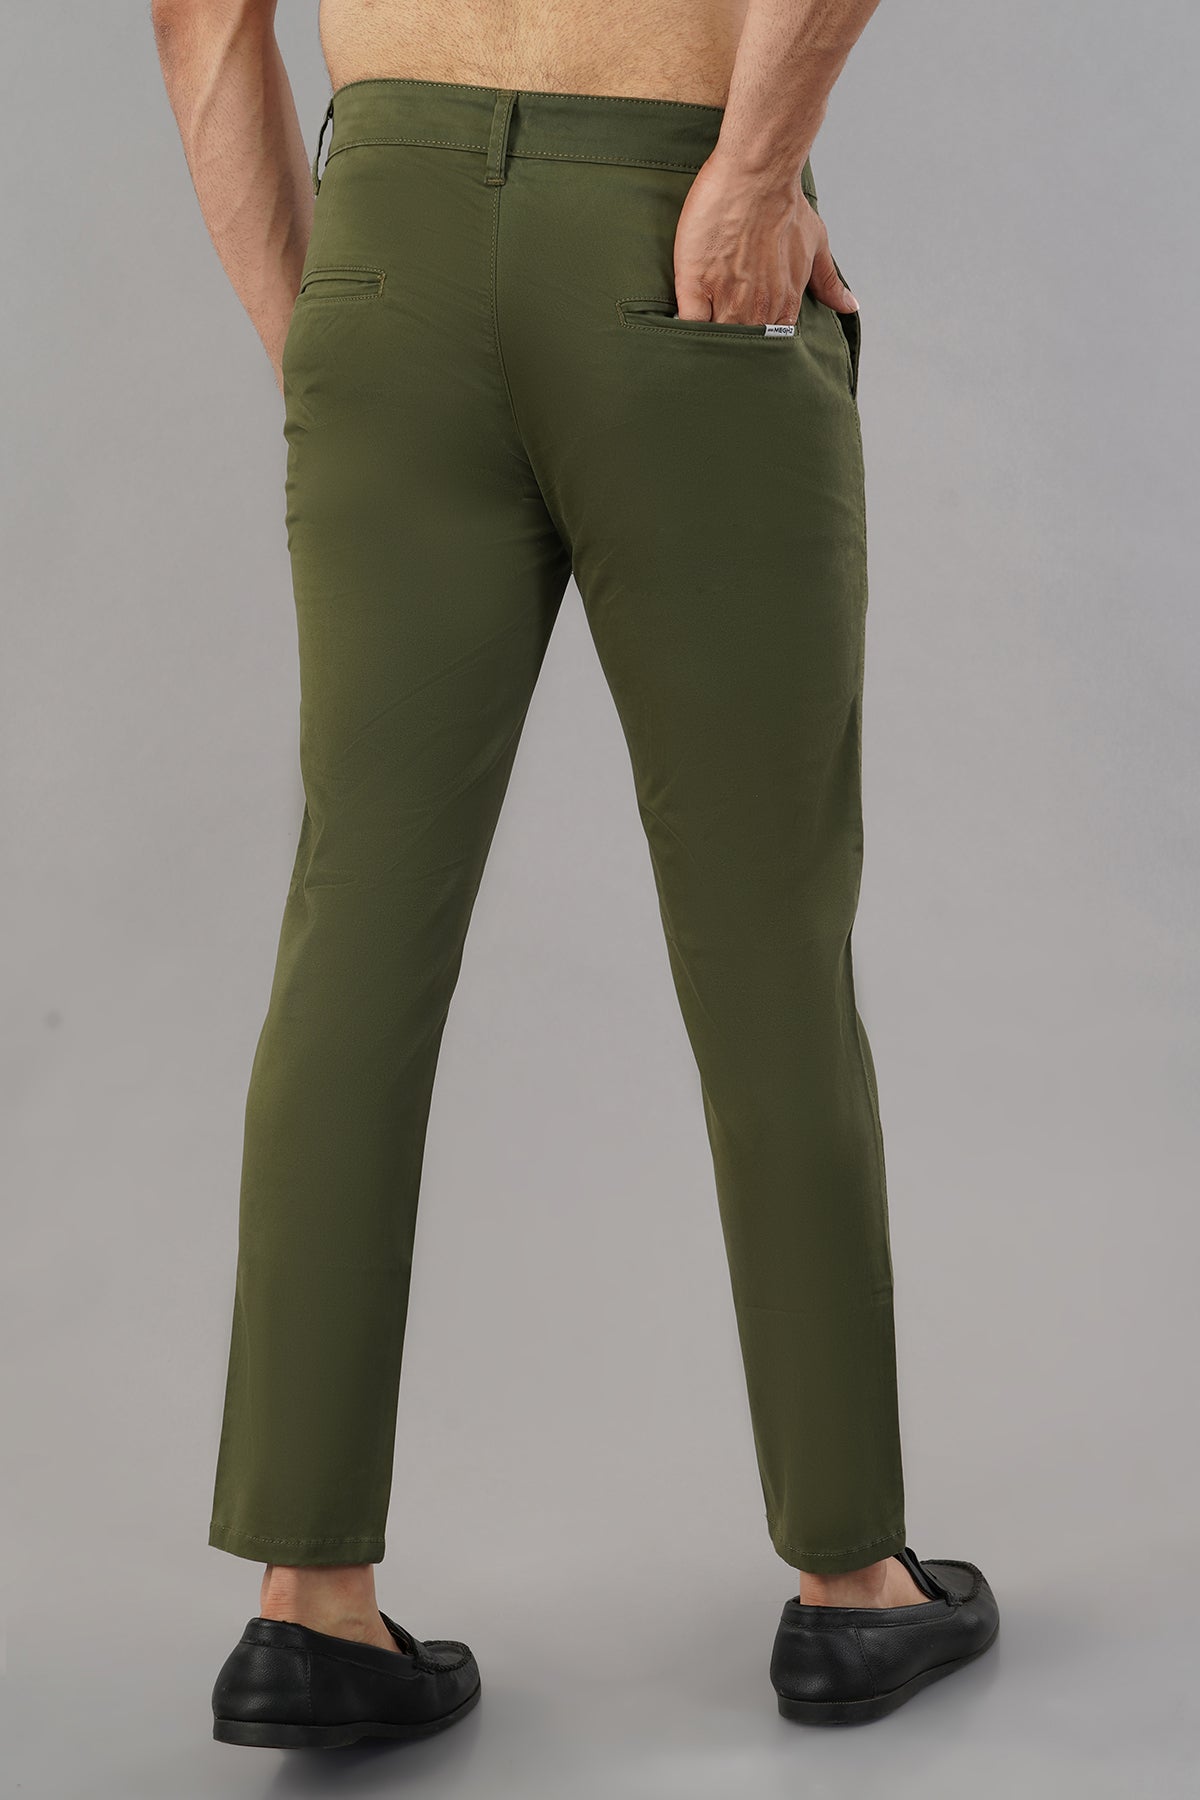 MENS ARMY GREEN CROPPED CHINOS